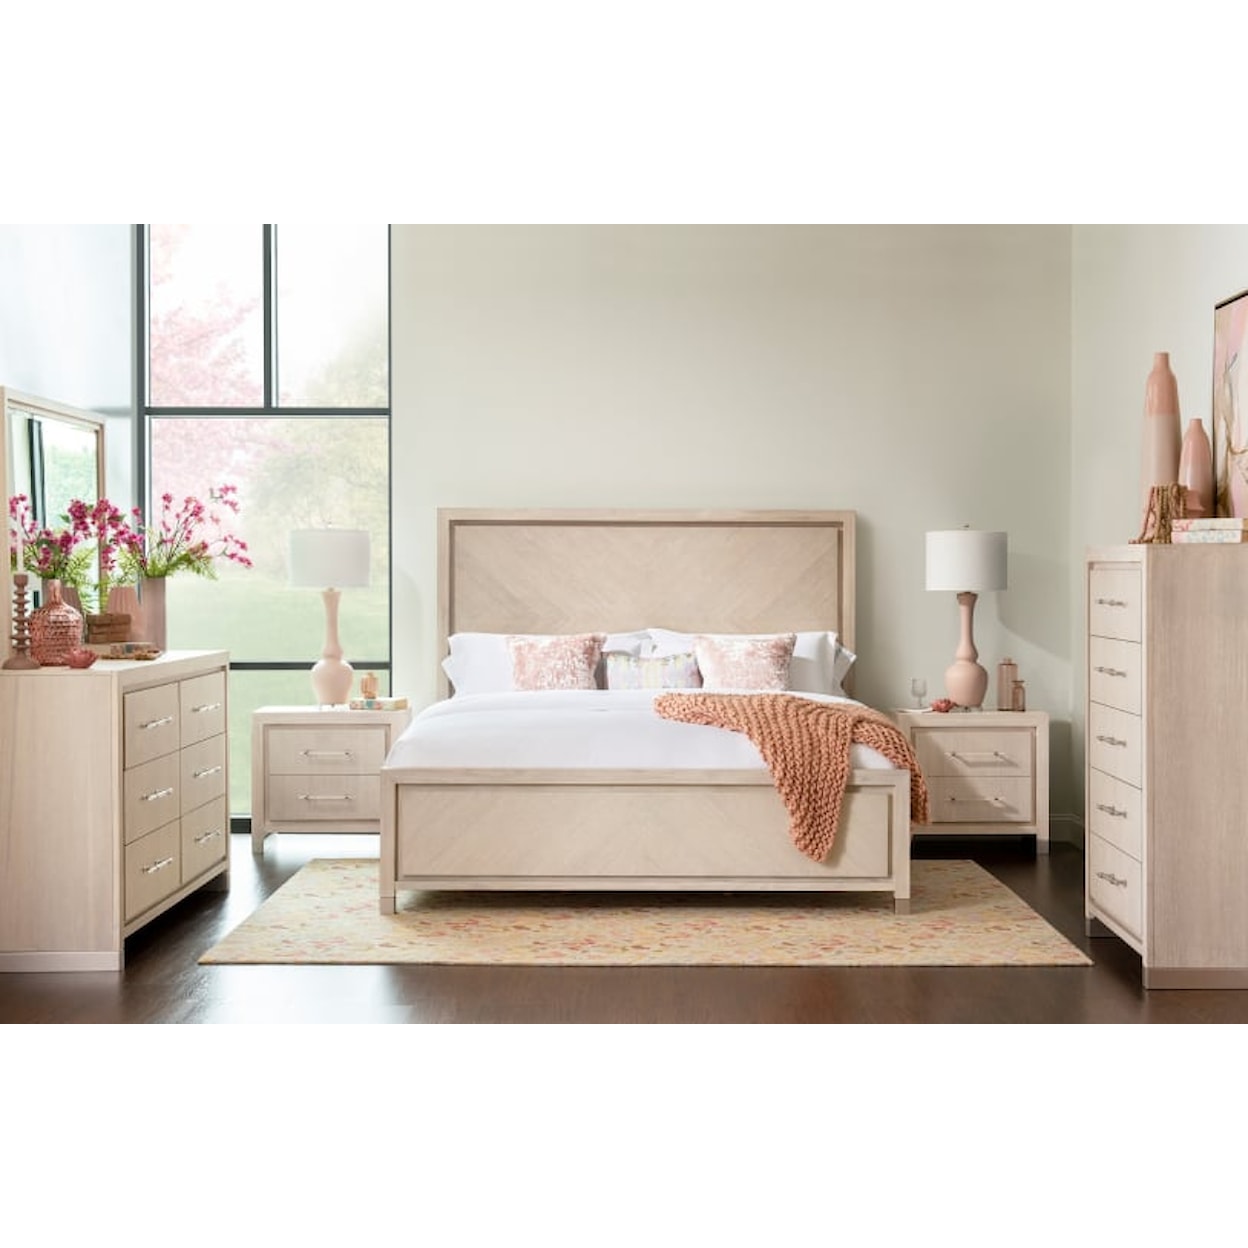 Legacy Classic Bliss Dresser and Mirror Set